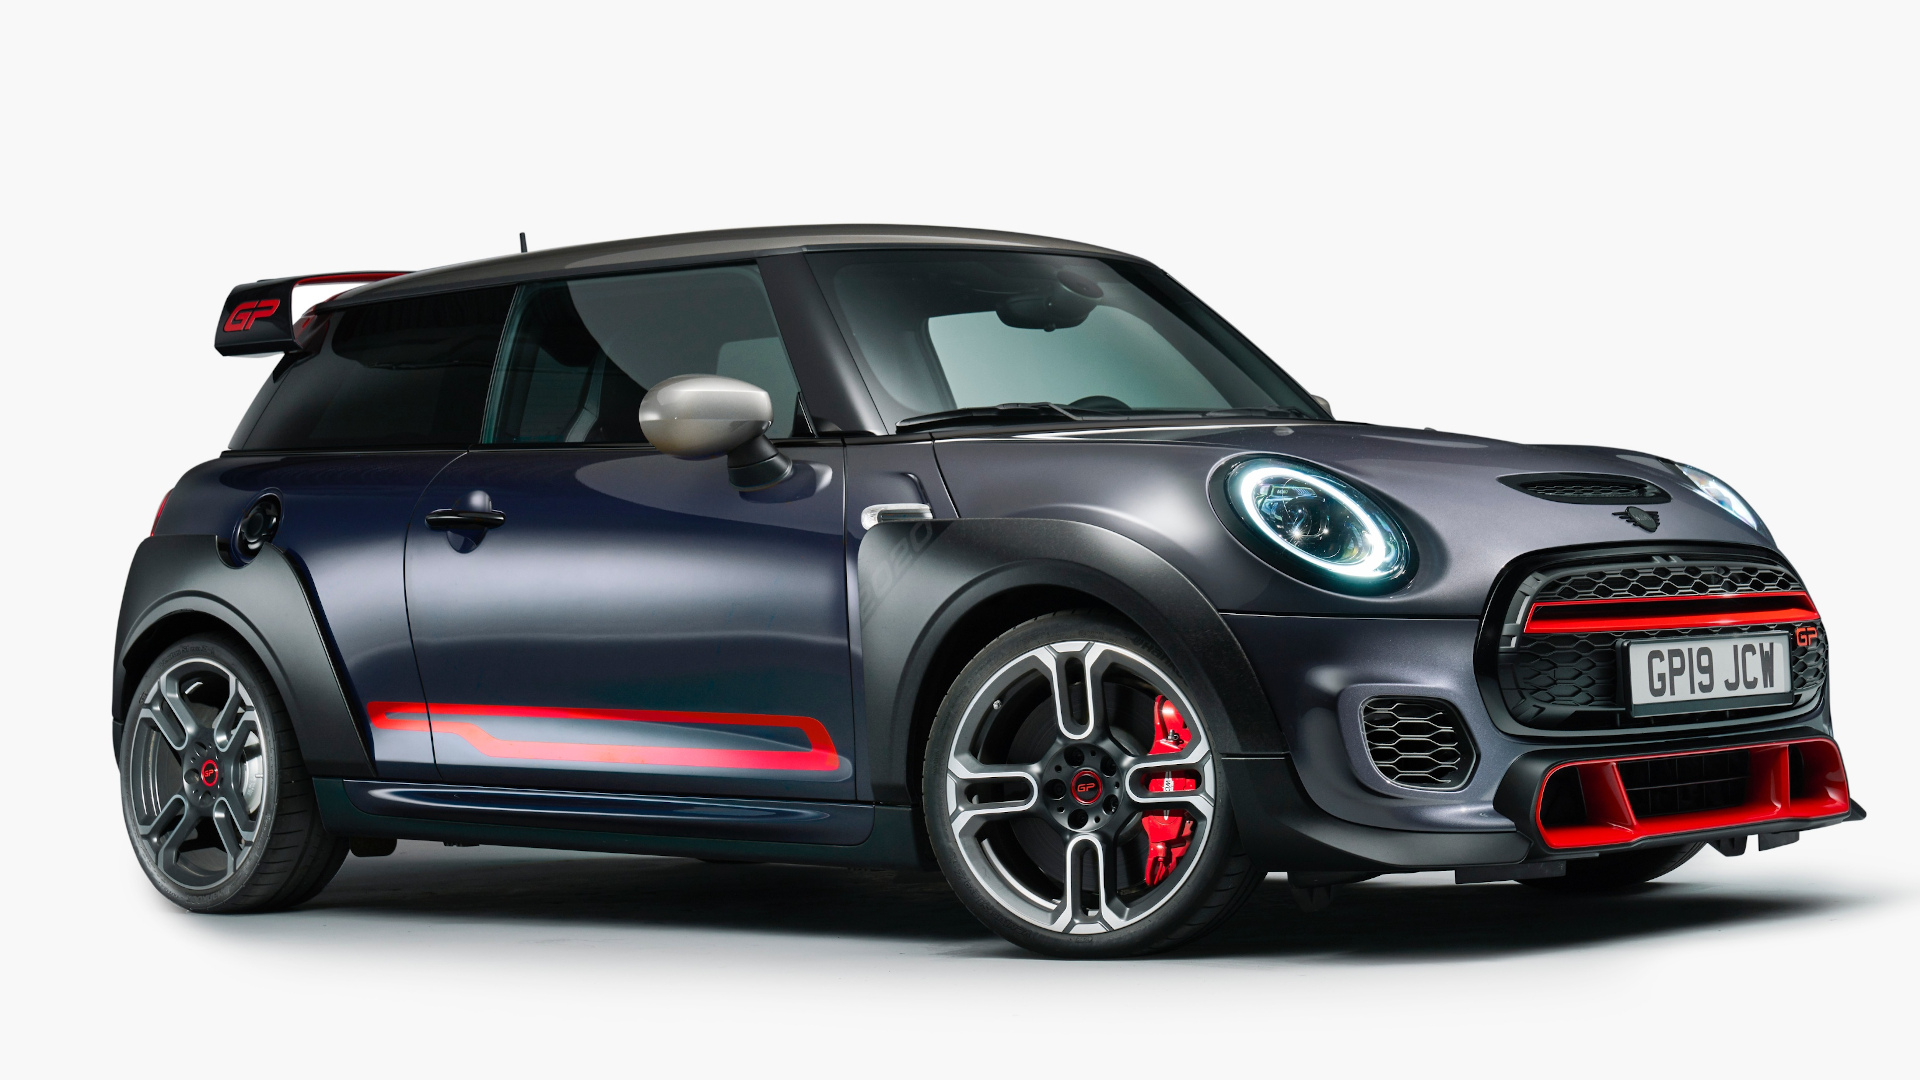 The 302hp Mini John Cooper Works GP is now available in PH* for P4.8M